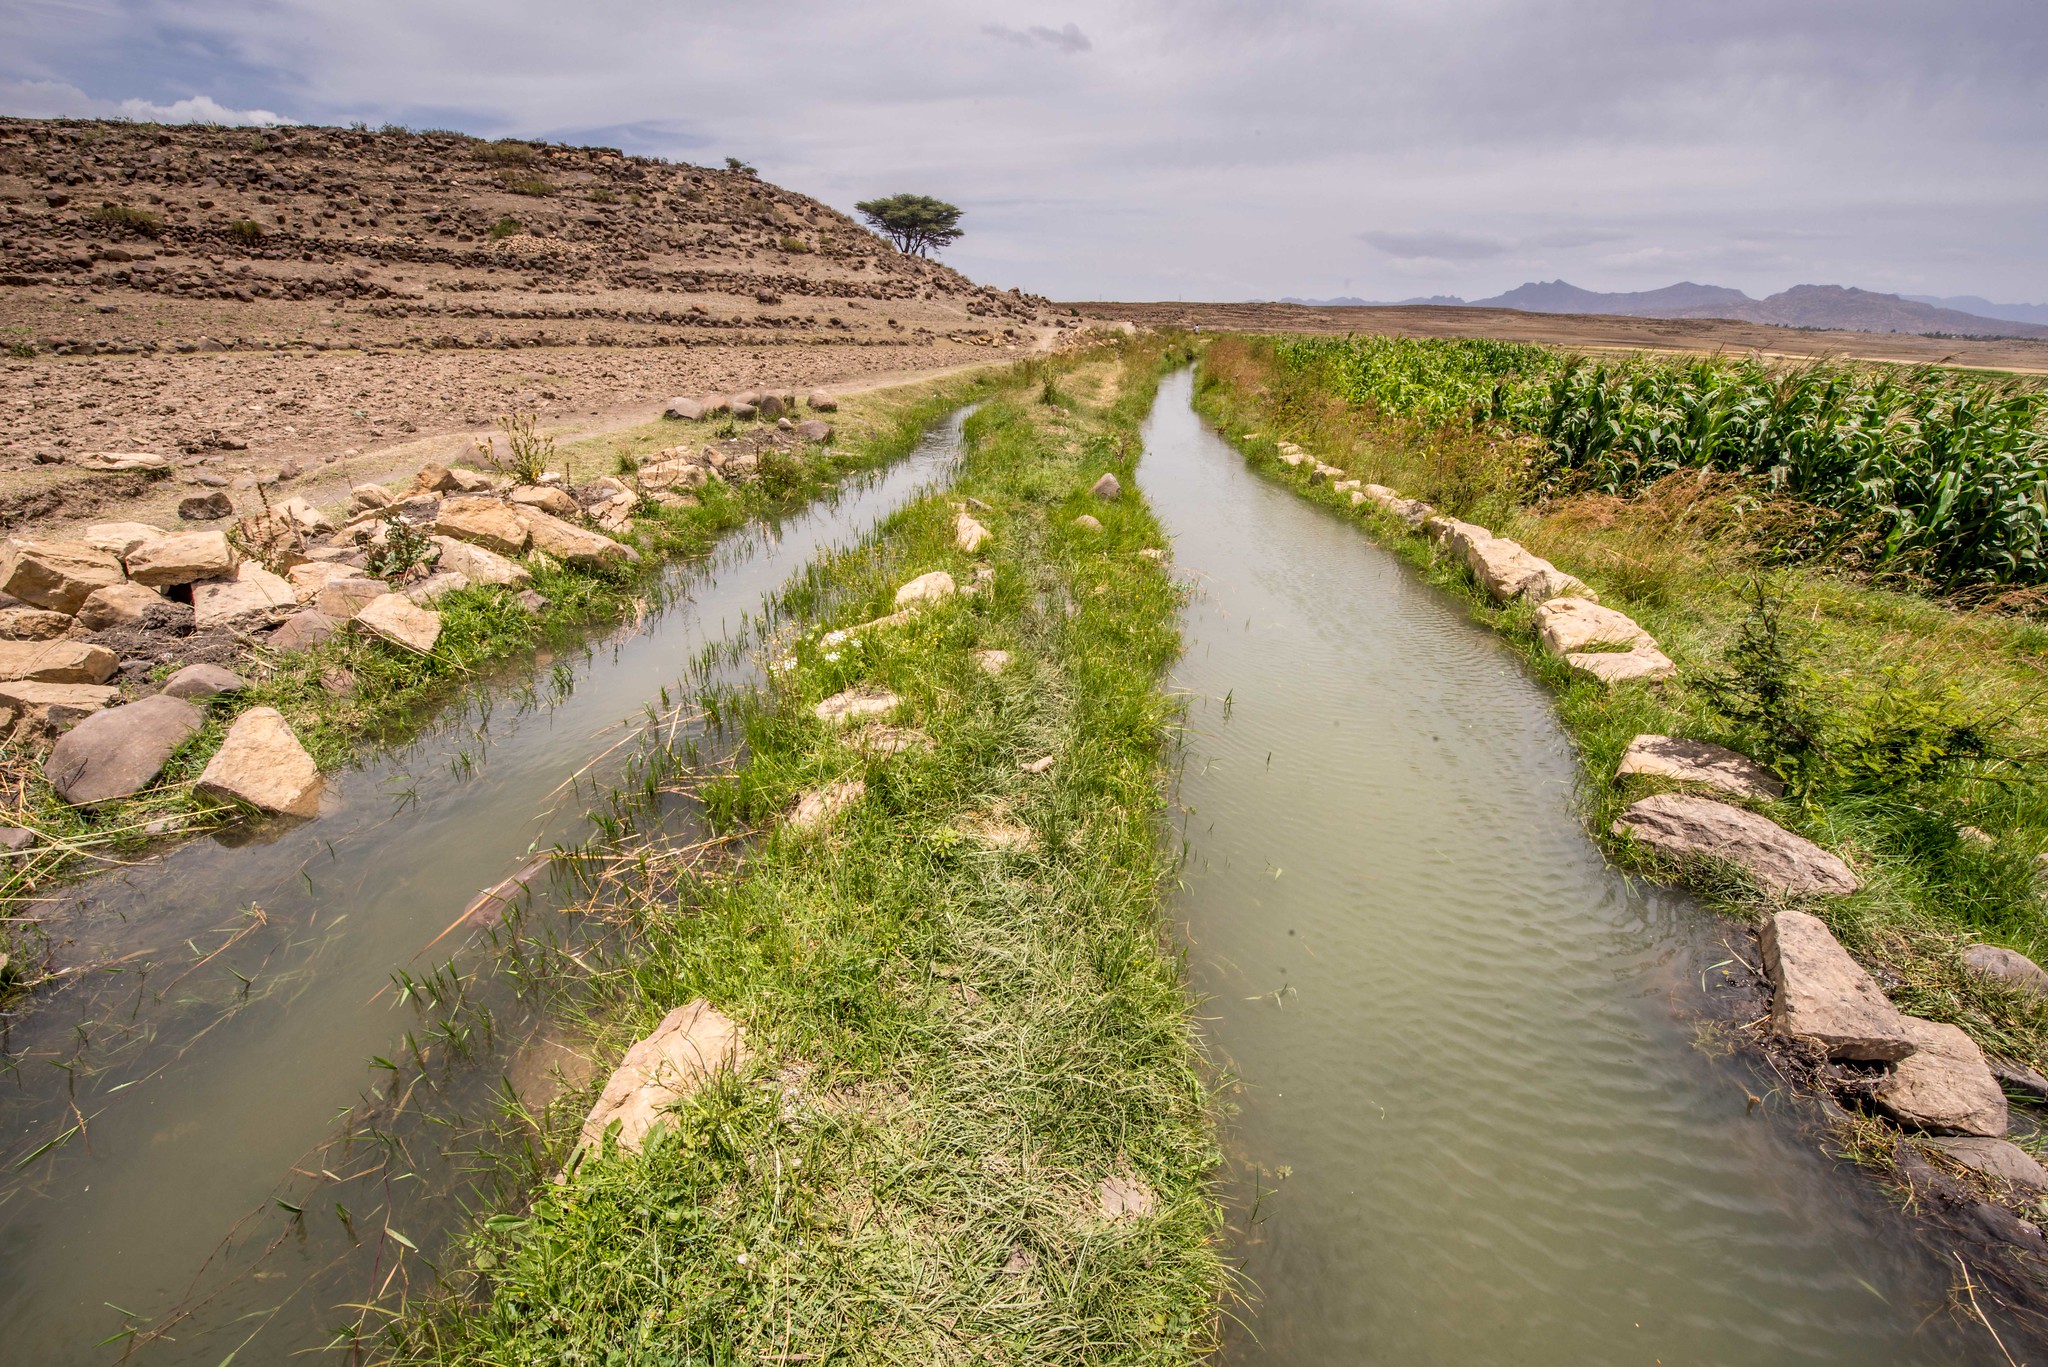 A method of field irrigation in the dry Tigray region